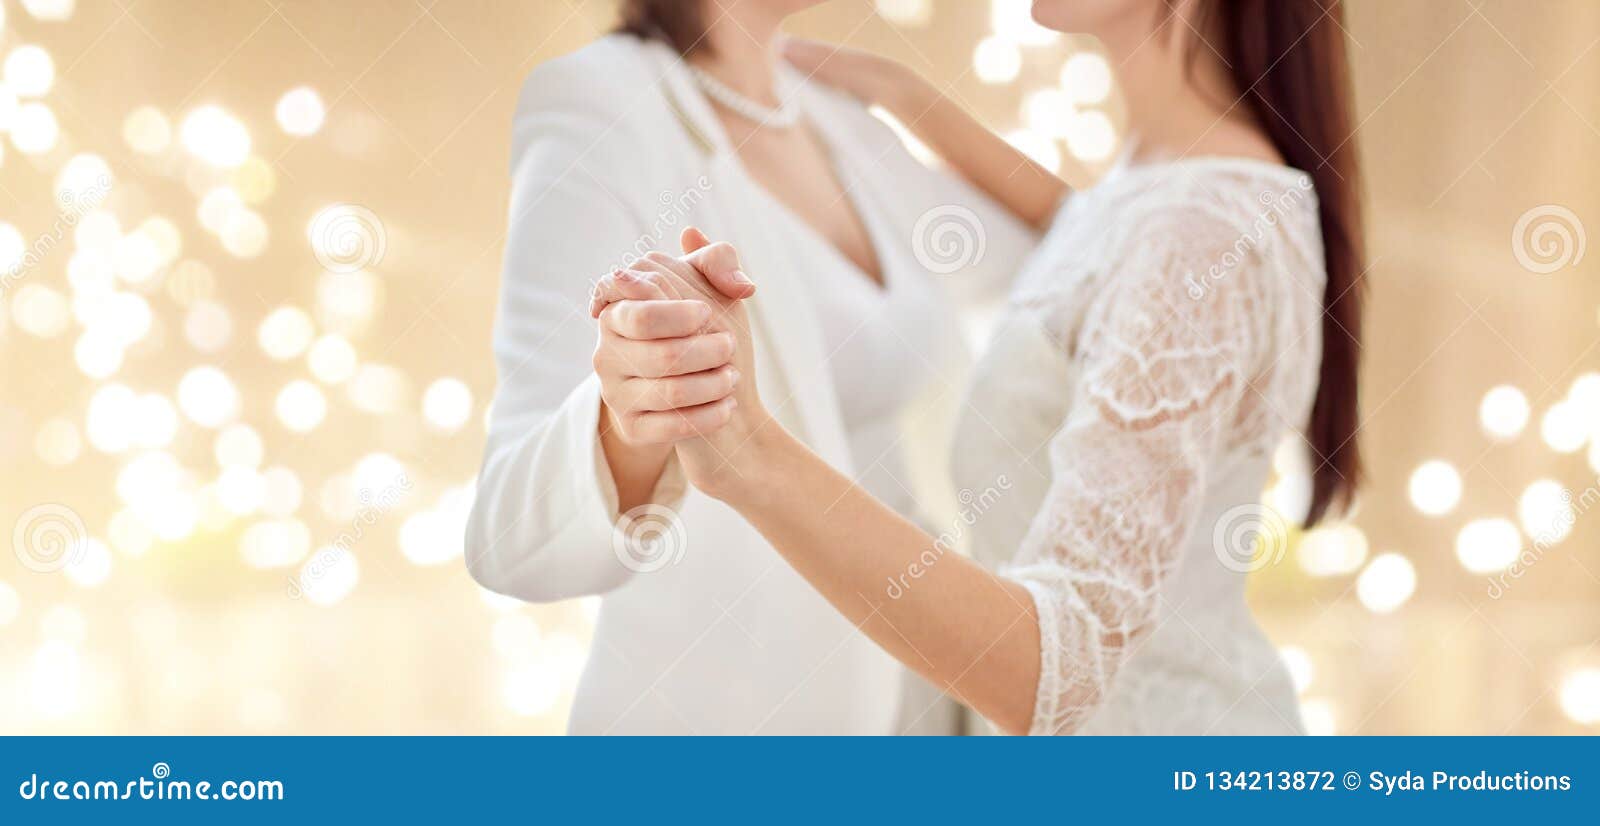 Close Up of Happy Married Lesbian Couple Dancing Stock Photo photo photo image